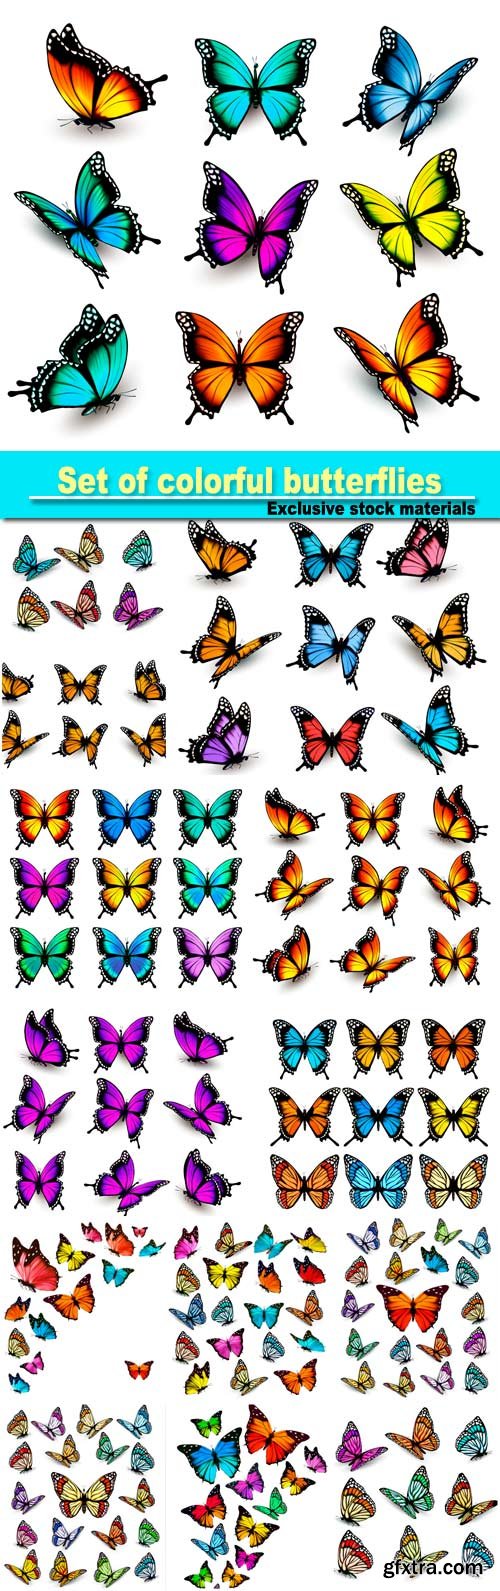 Set of colorful butterflies vector